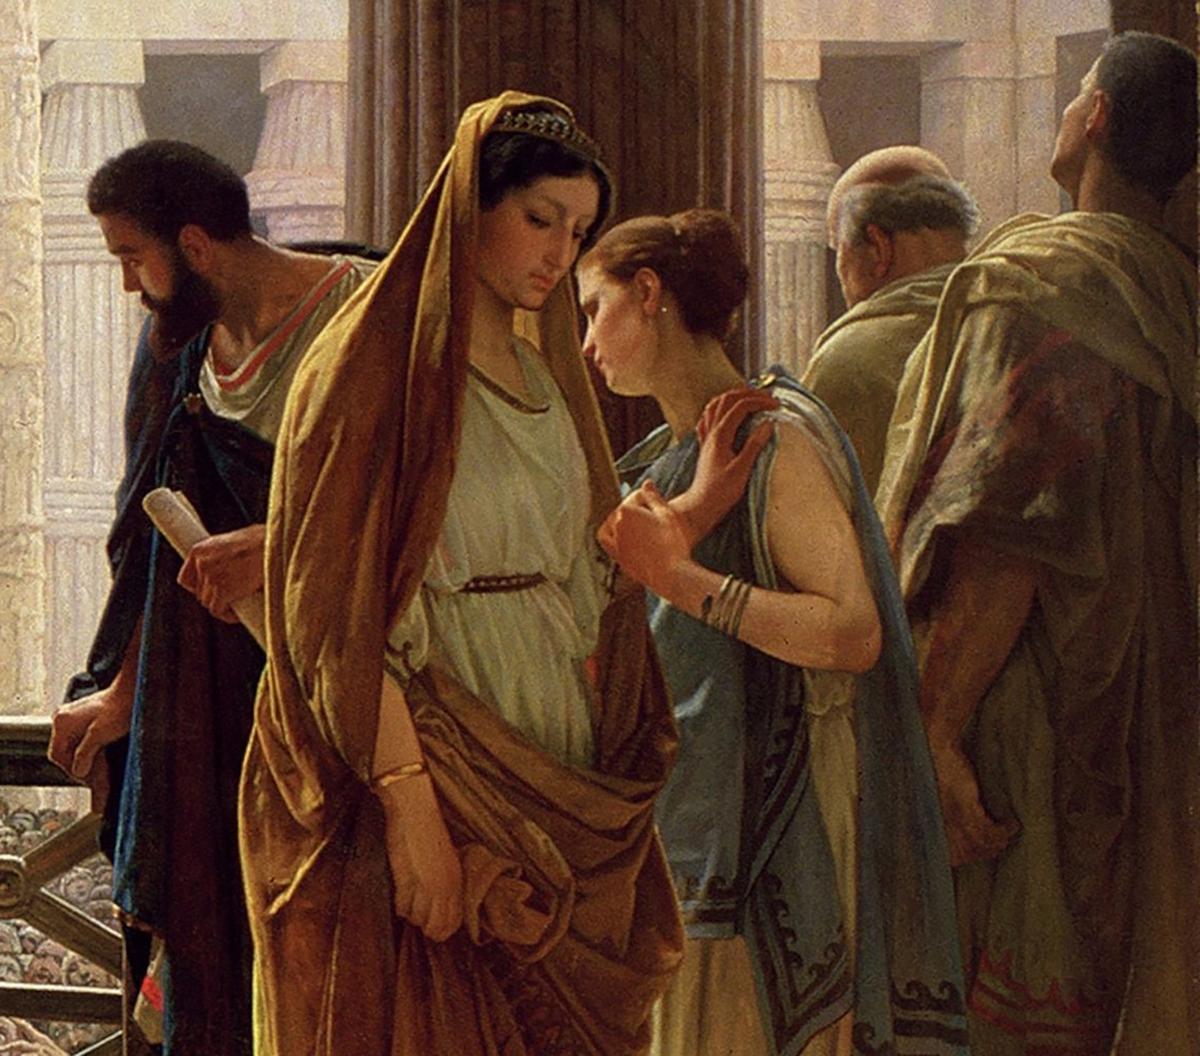 Detail of Pilate's wife from “Ecce Homo (Behold the Man!)," between 1871 to 1891, by Atonio Ciseri. (Public Domain)